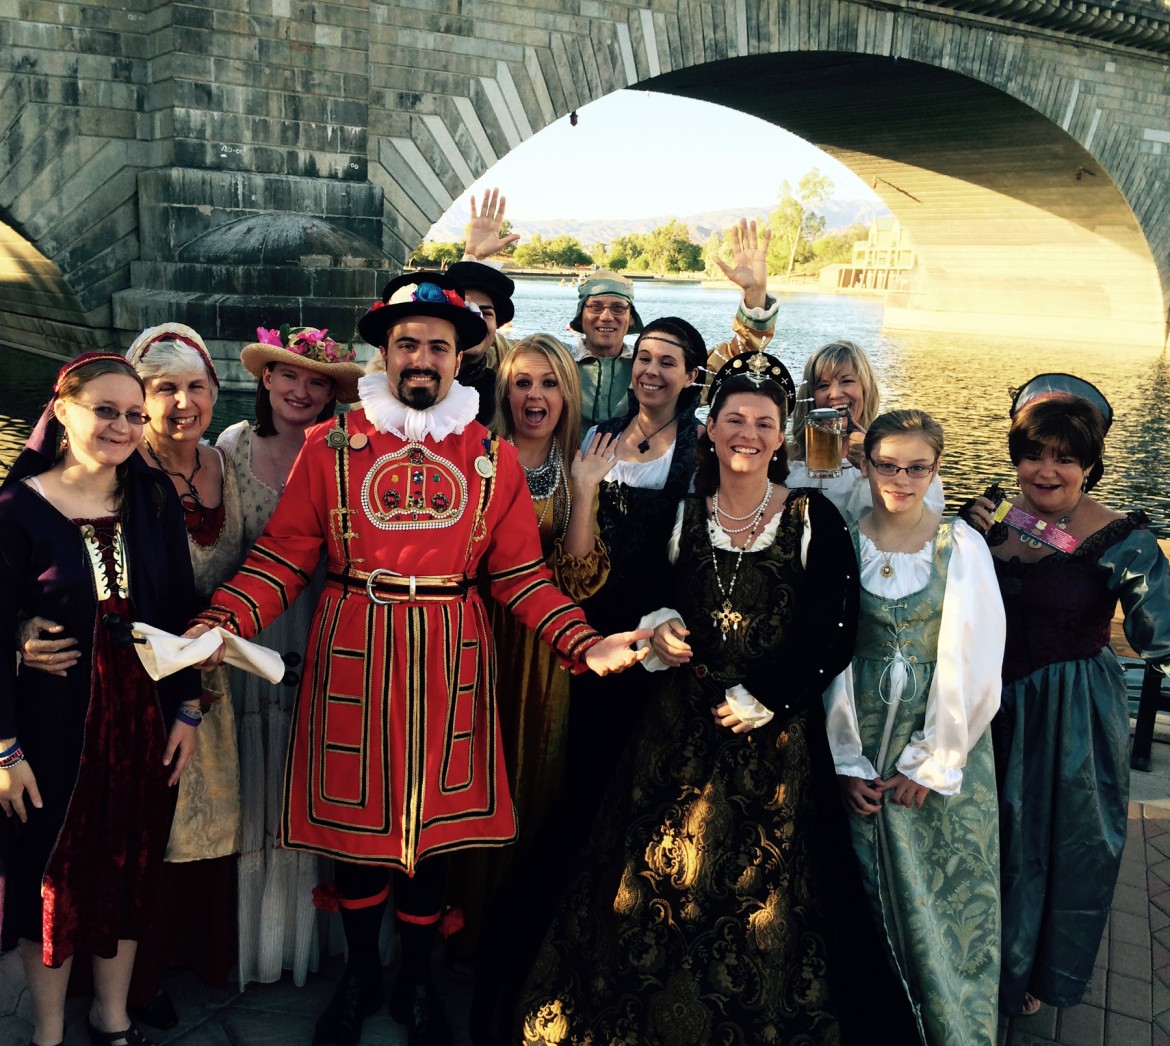 A number of volunteers, in period costume, announce the plans for the 1st Annual London Bridge Renaissance Faire. Naturally the announcement was made under the London Bridge.